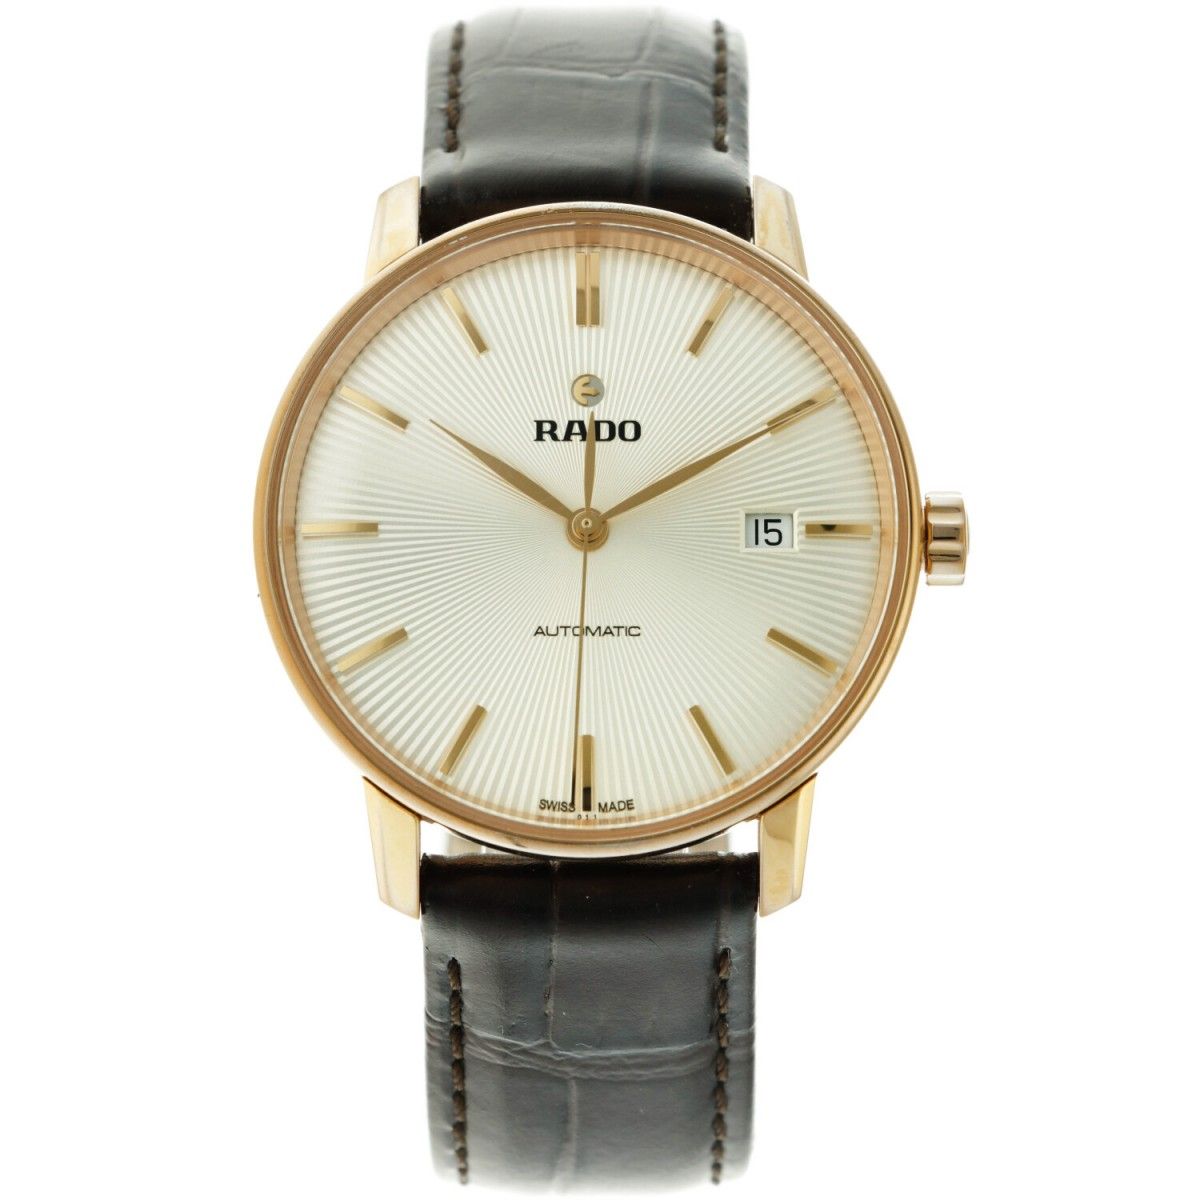 Rado Coupole 763.3861.2 - Men's watch - 2020. Case: gold plated - strap: leather&hellip;